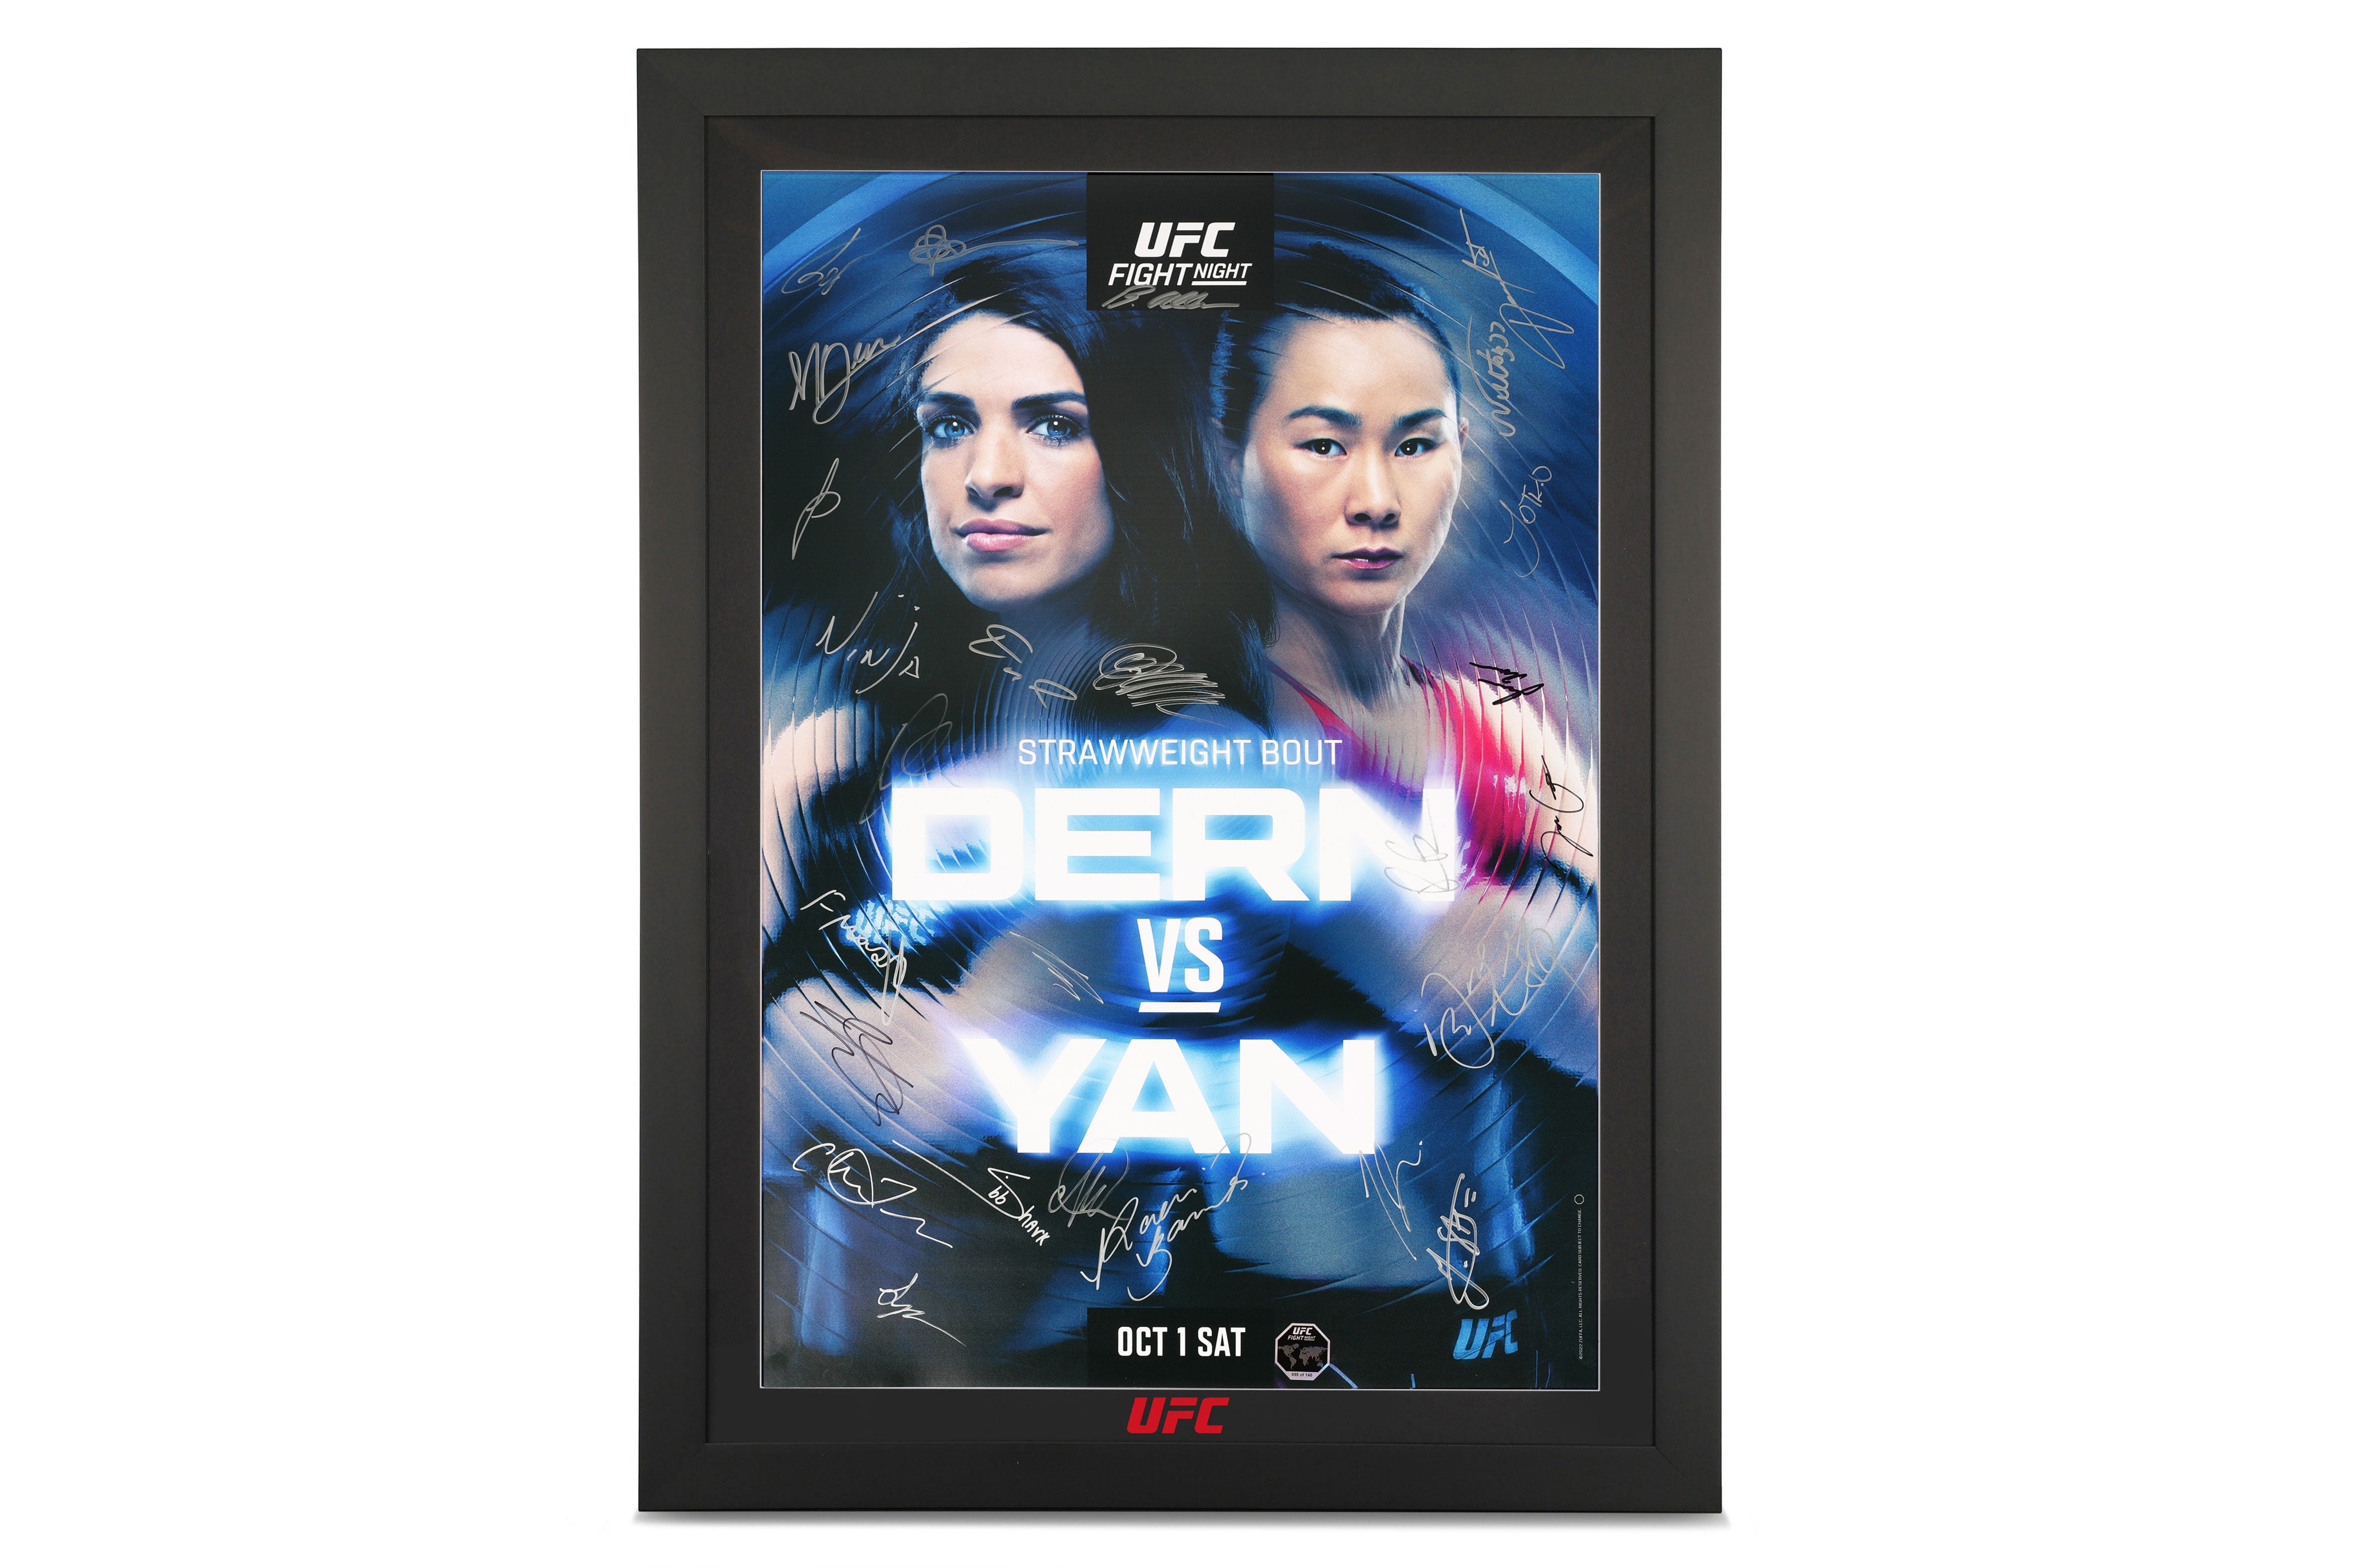 UFC Fight Night: Dern vs Yan Autographed Event Poster